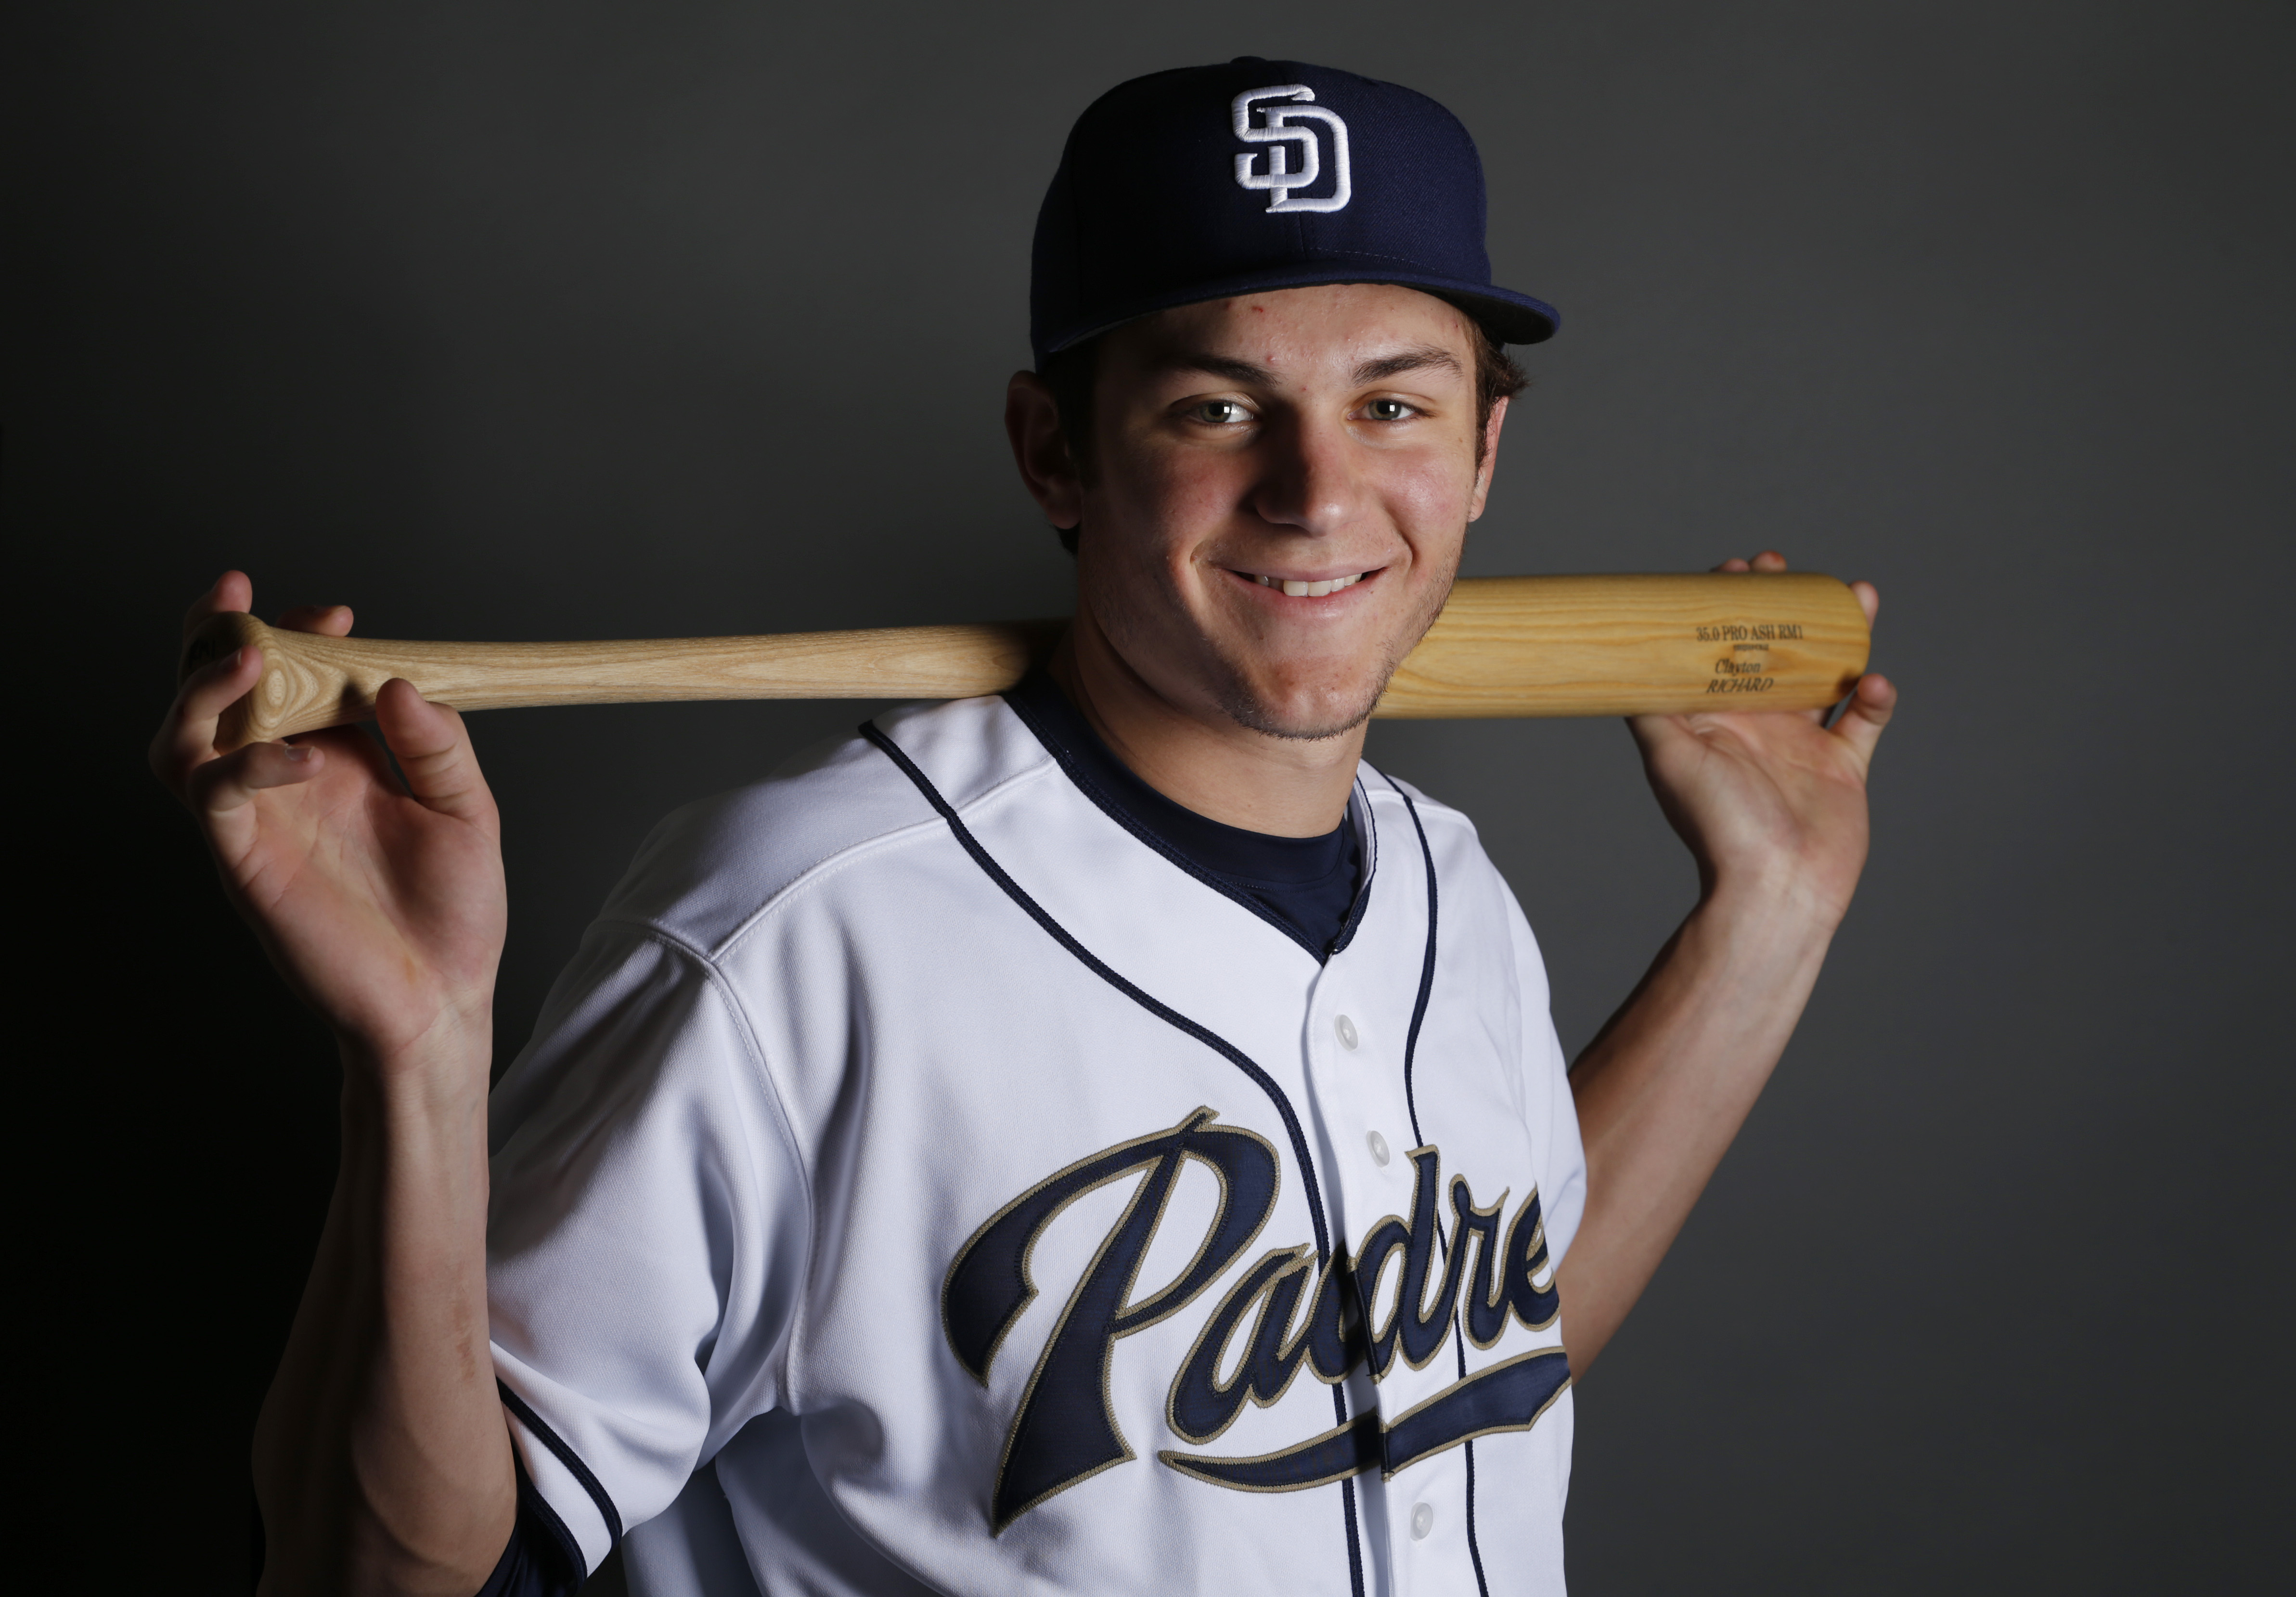 Expectations high for Nationals prospect Trea Turner